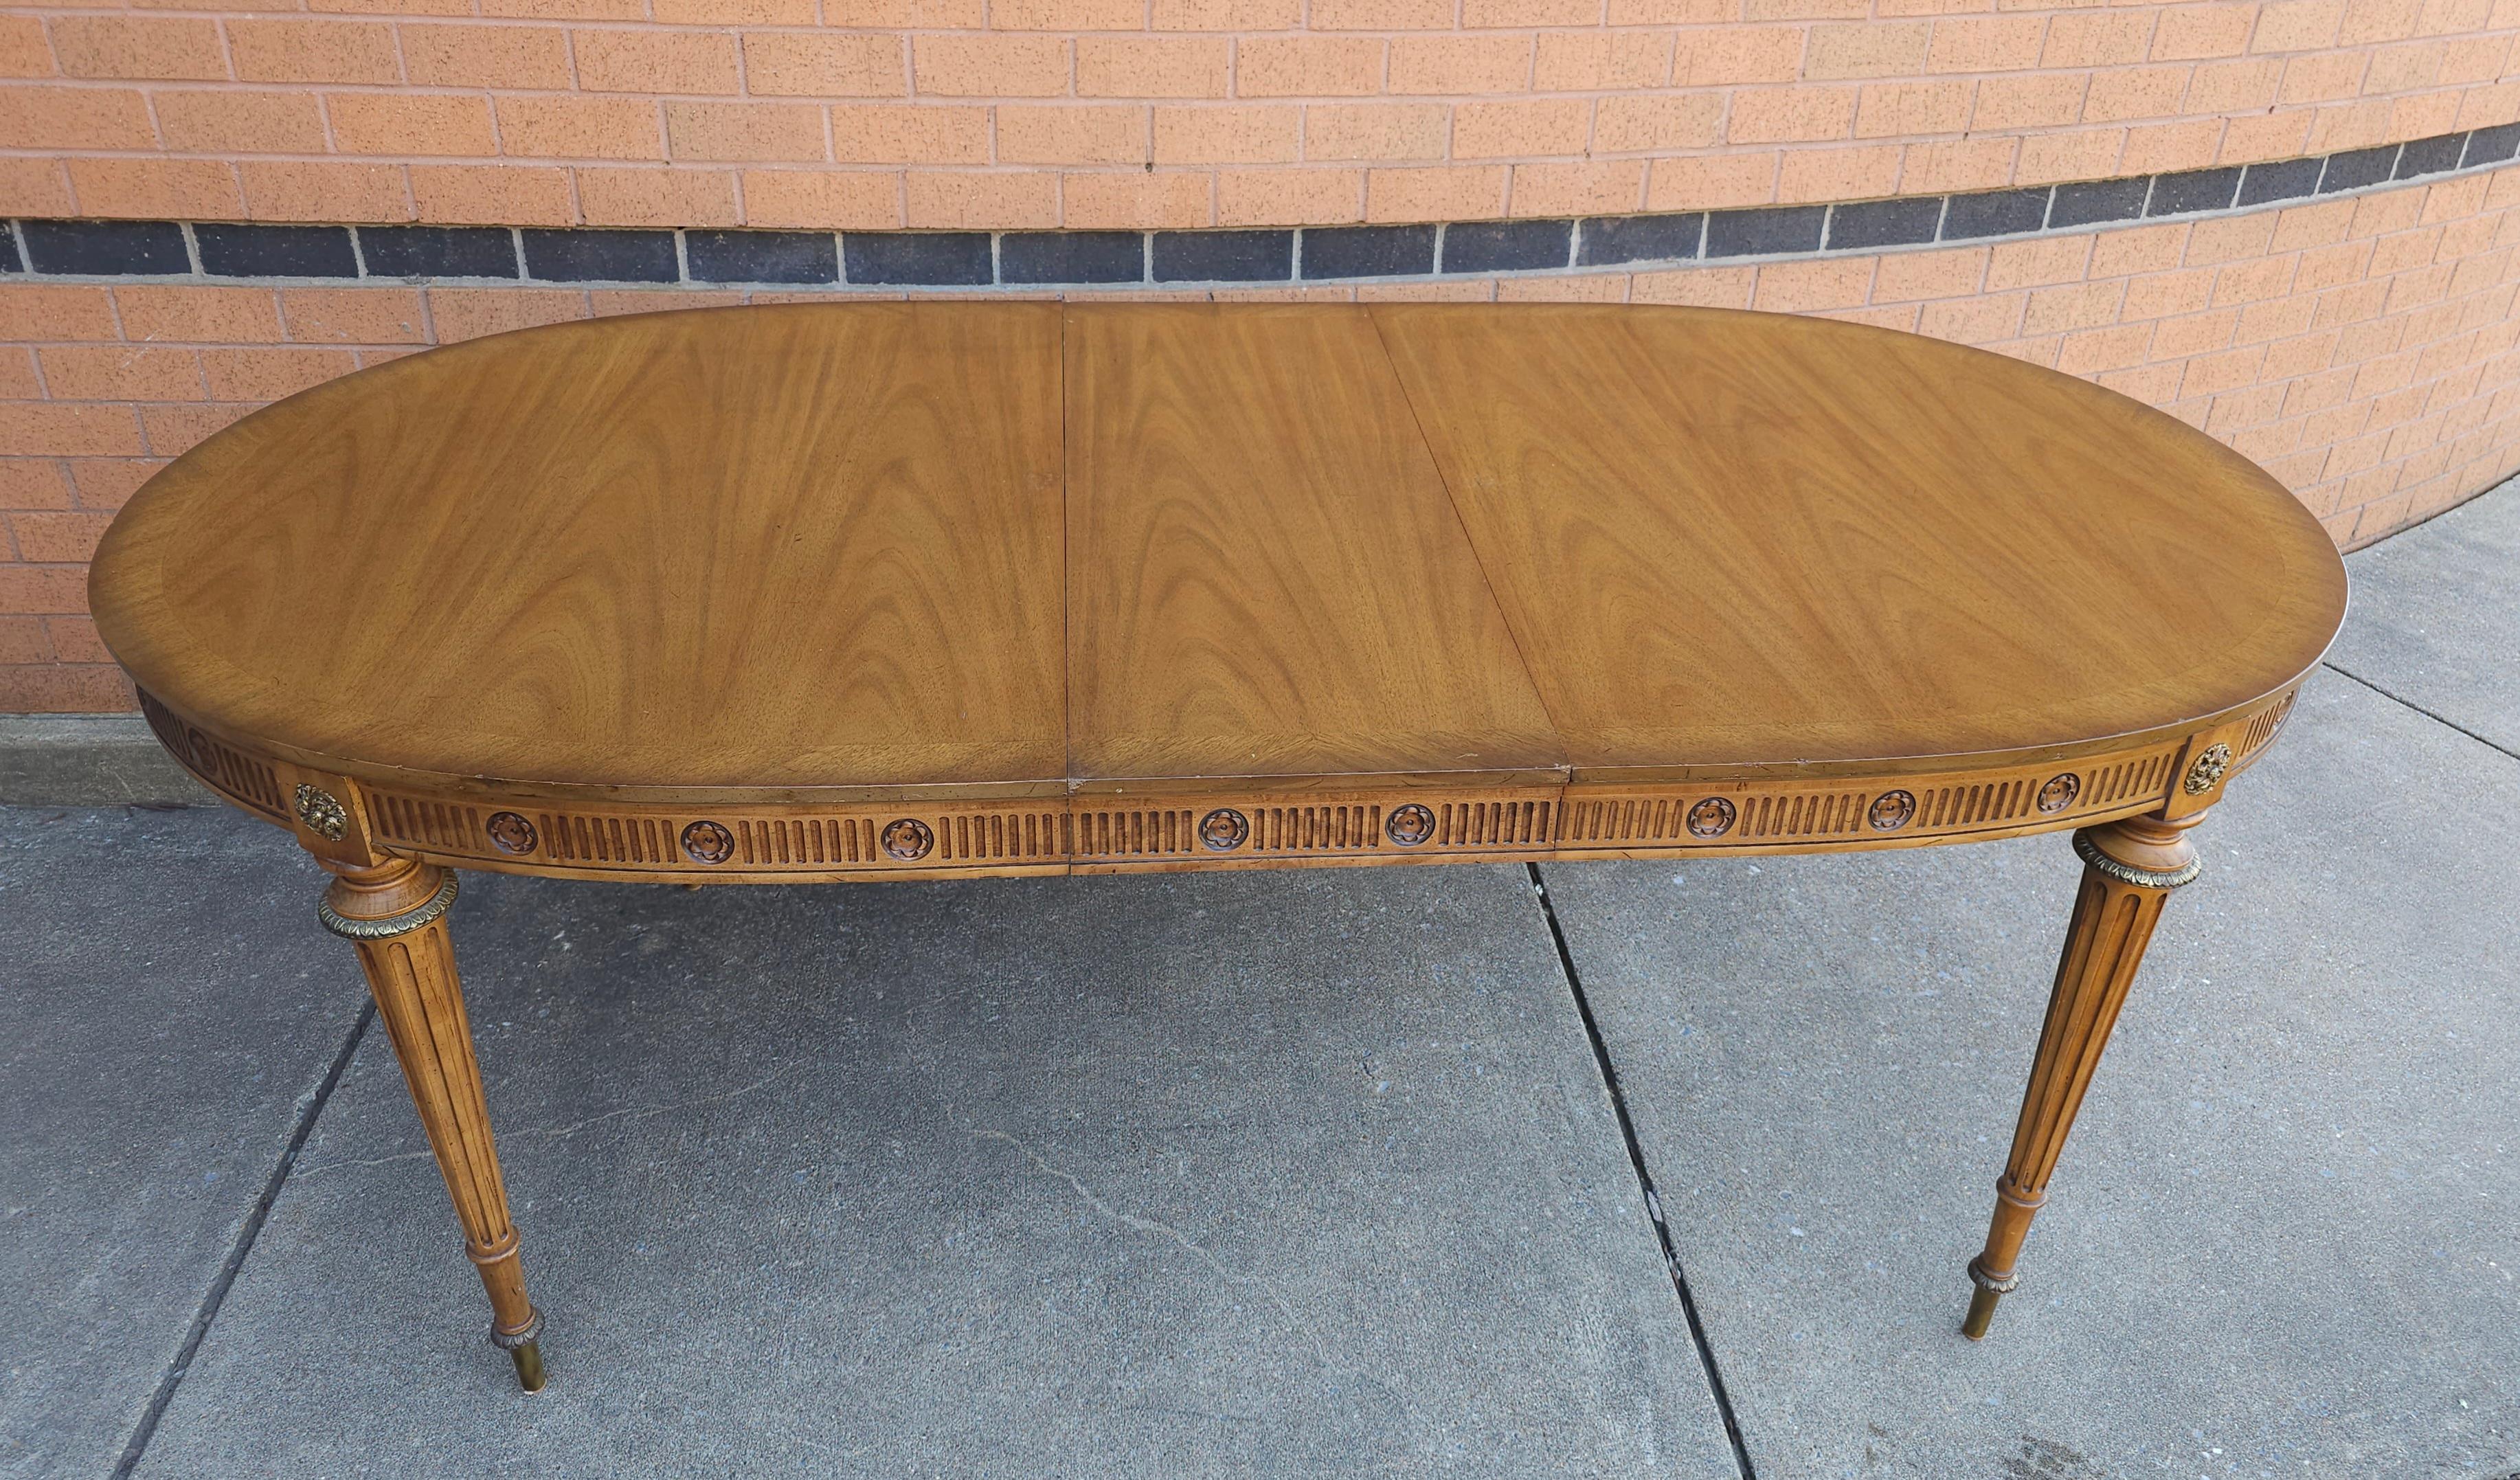 20th Century Louis XVI Brass Mounted French Walnut Oval Extension Dining Table W/ 2 Leaves For Sale